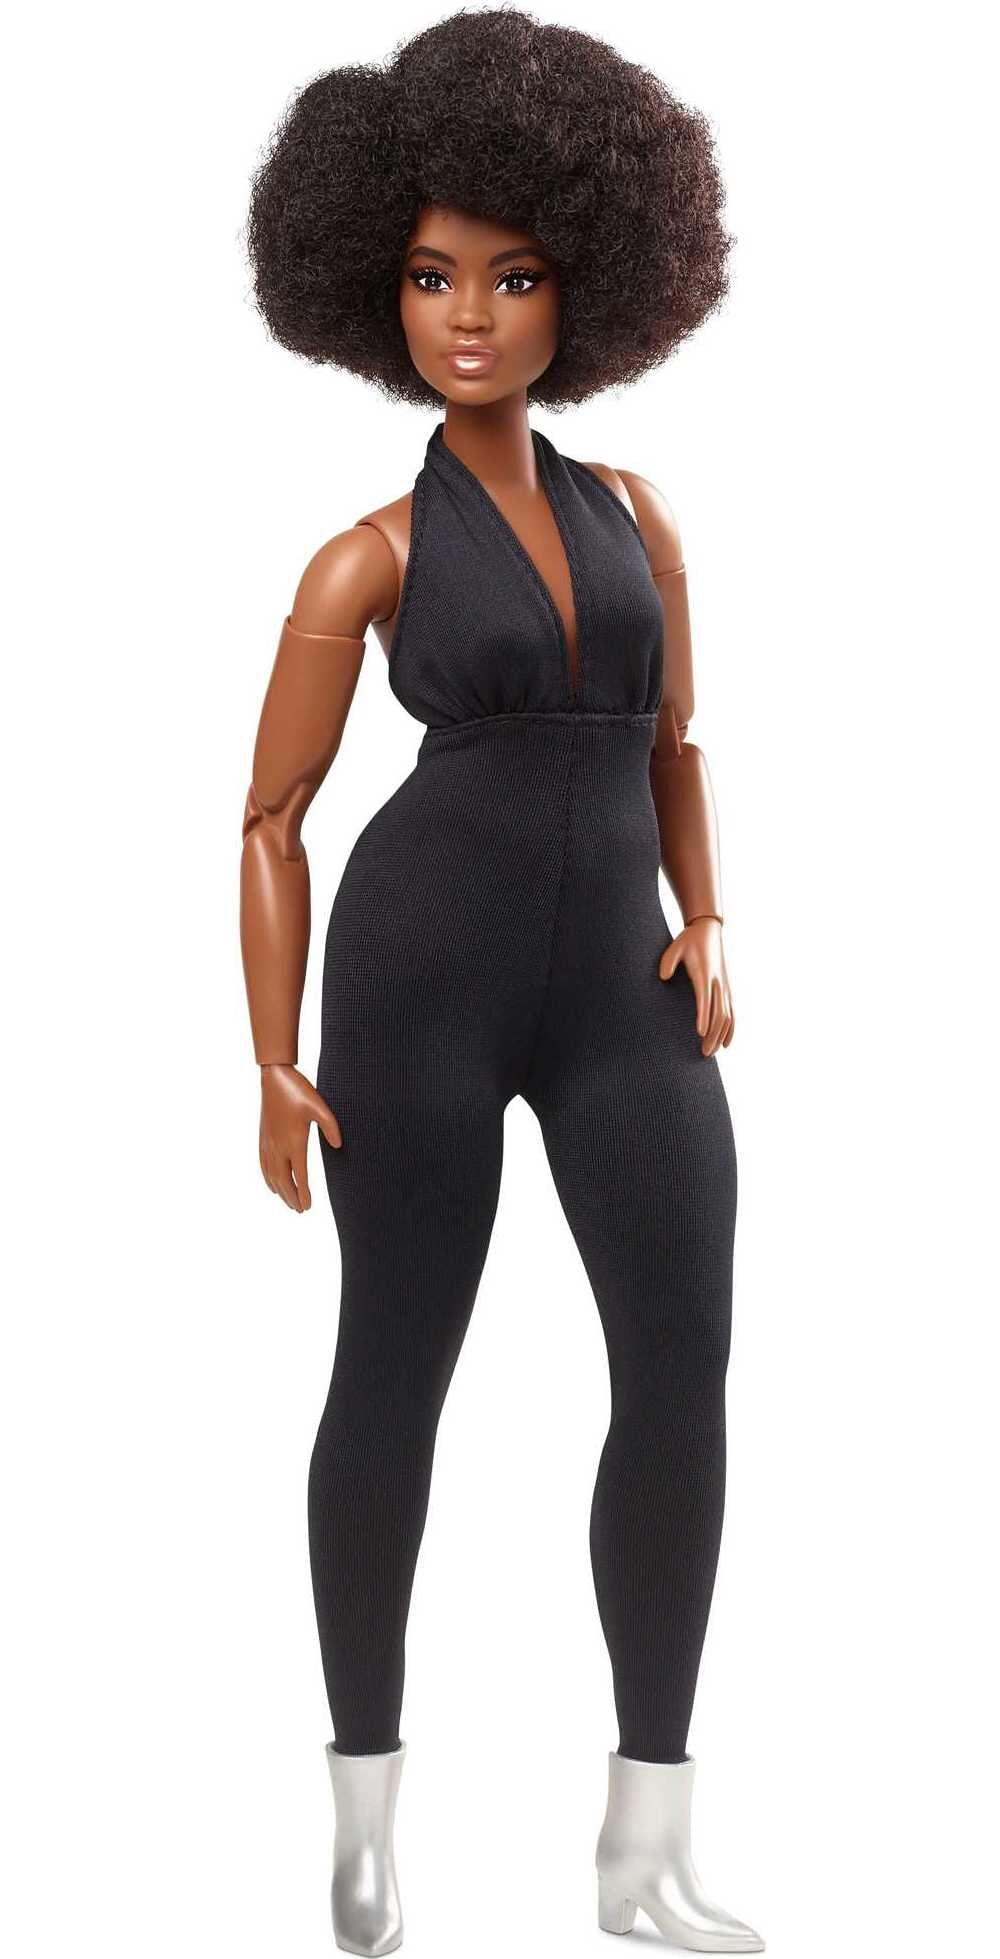 Barbie Looks Collectible Fashion Doll, Posable with Natural Hair  Black  Jumpsuit